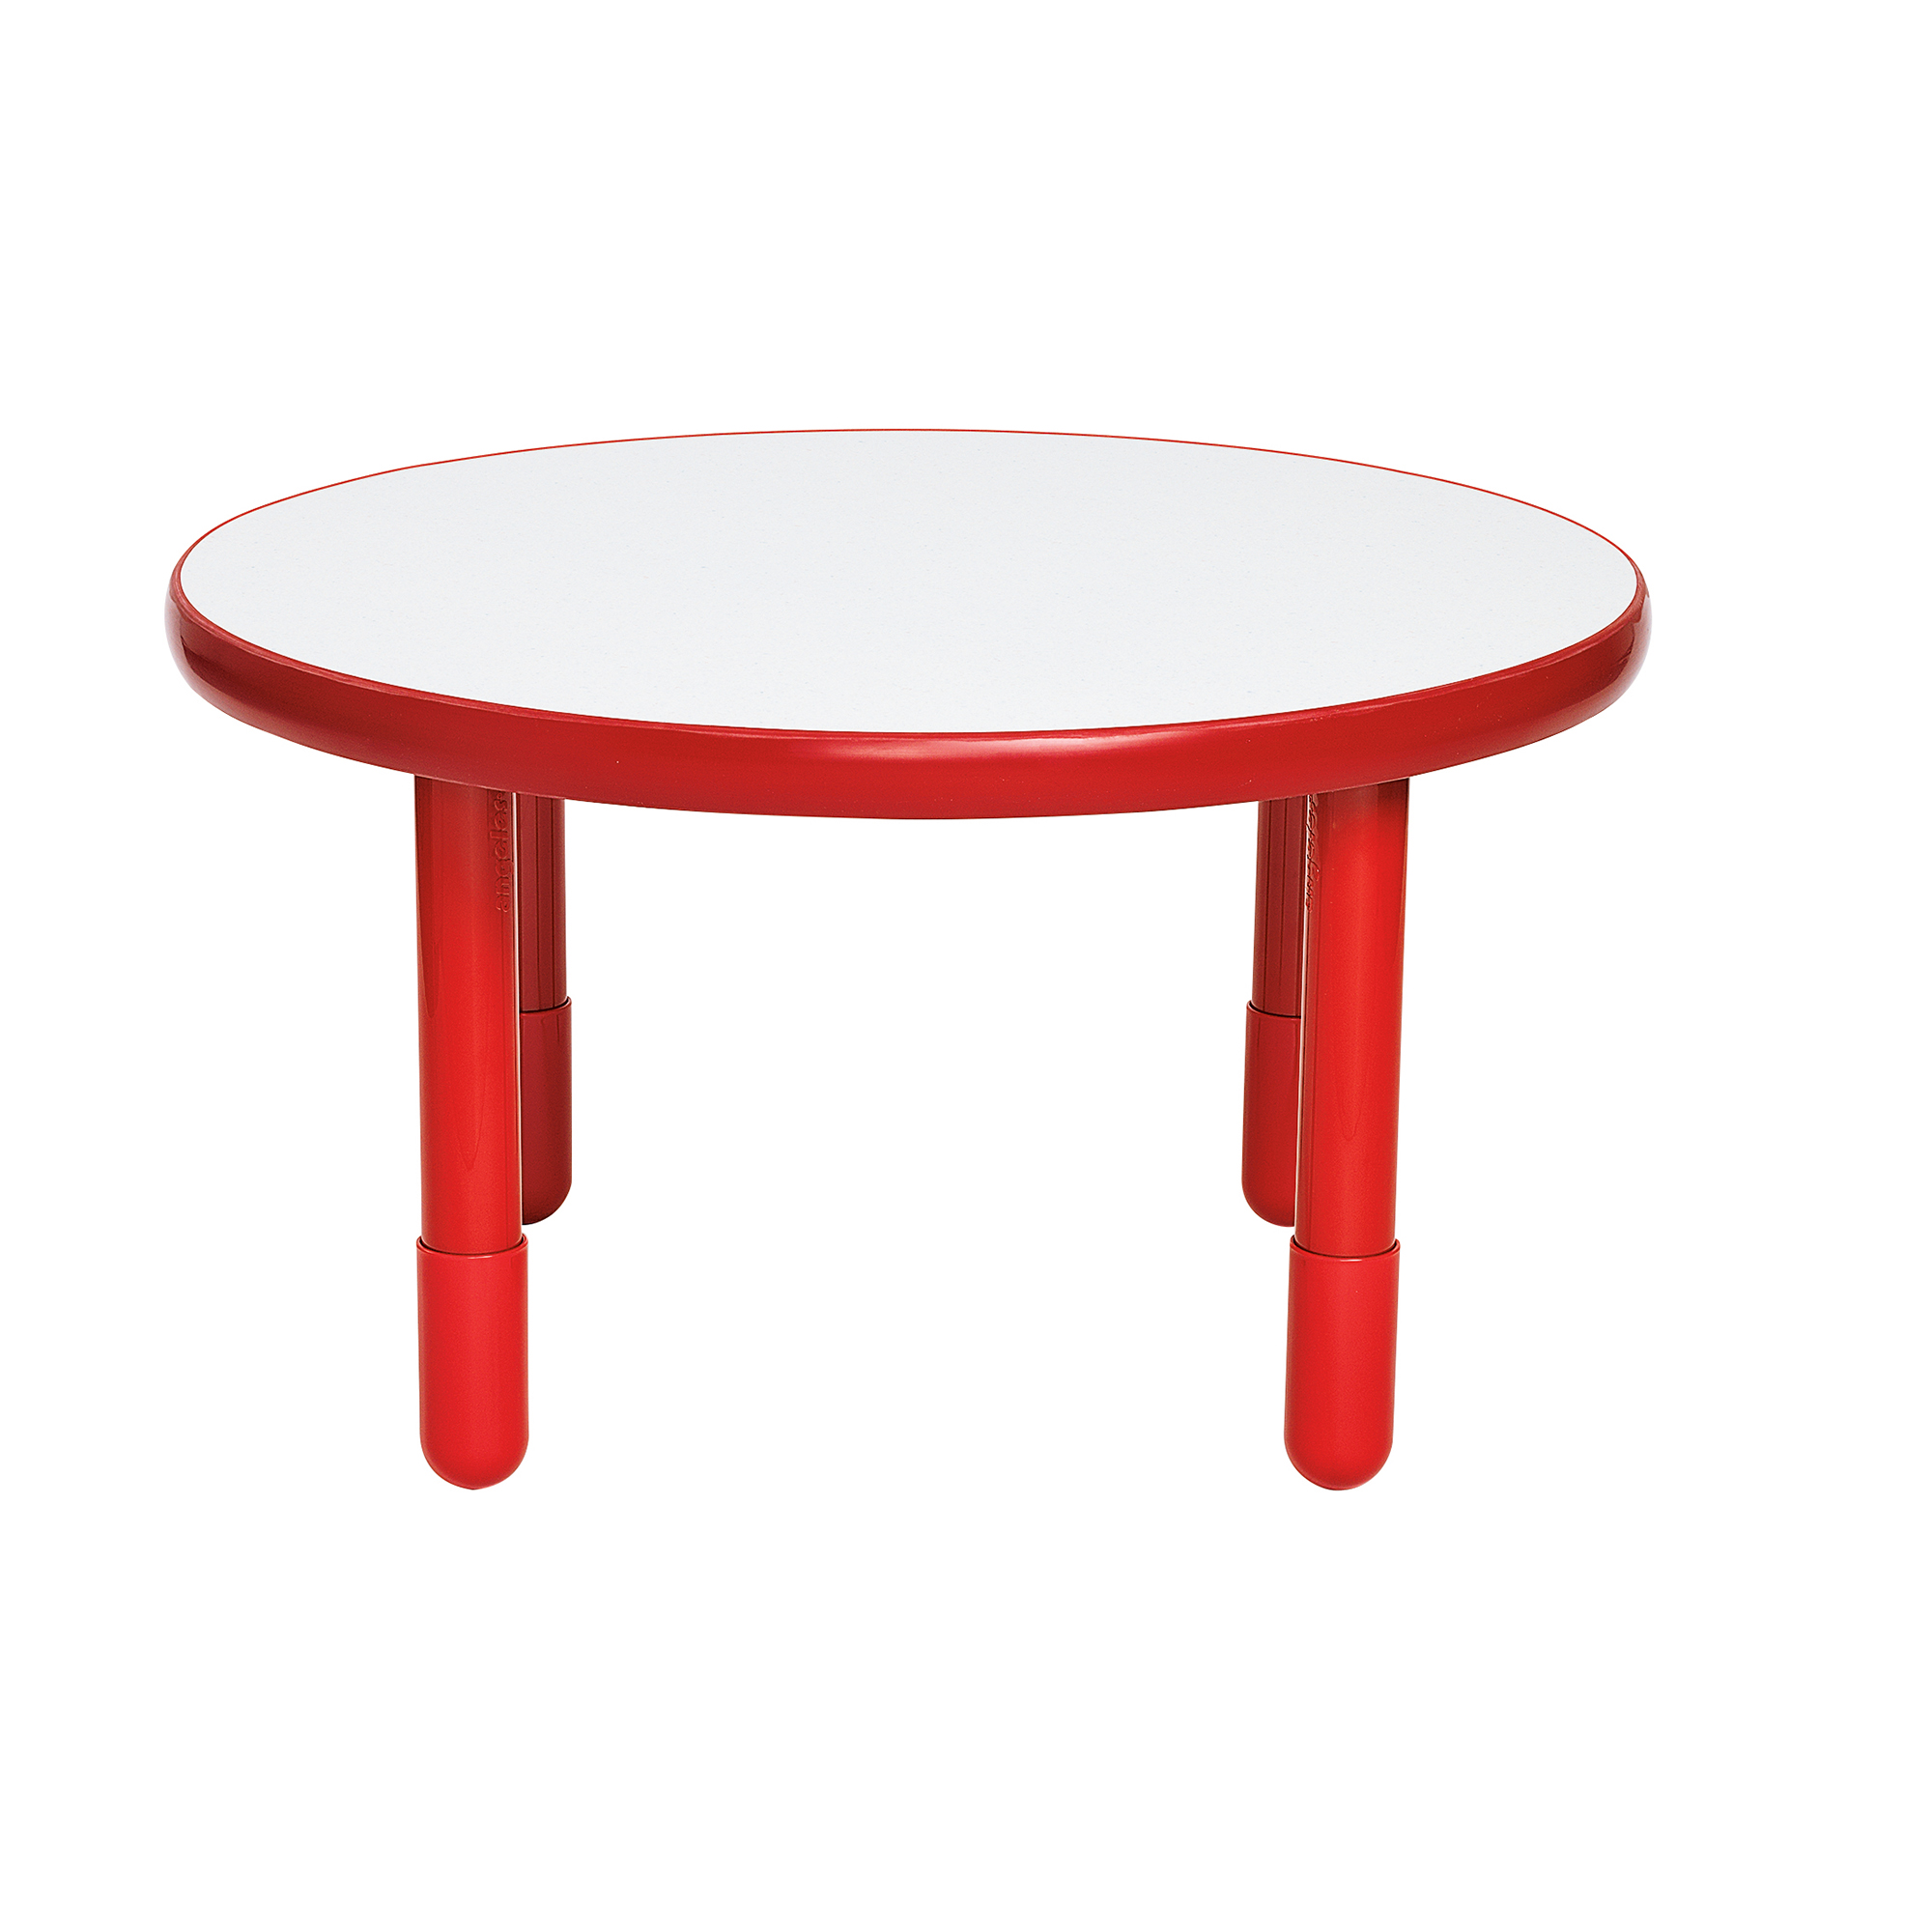 BaseLine® 91,5 cm Diameter Round Table - Candy Apple Red with 51 cm  Legs